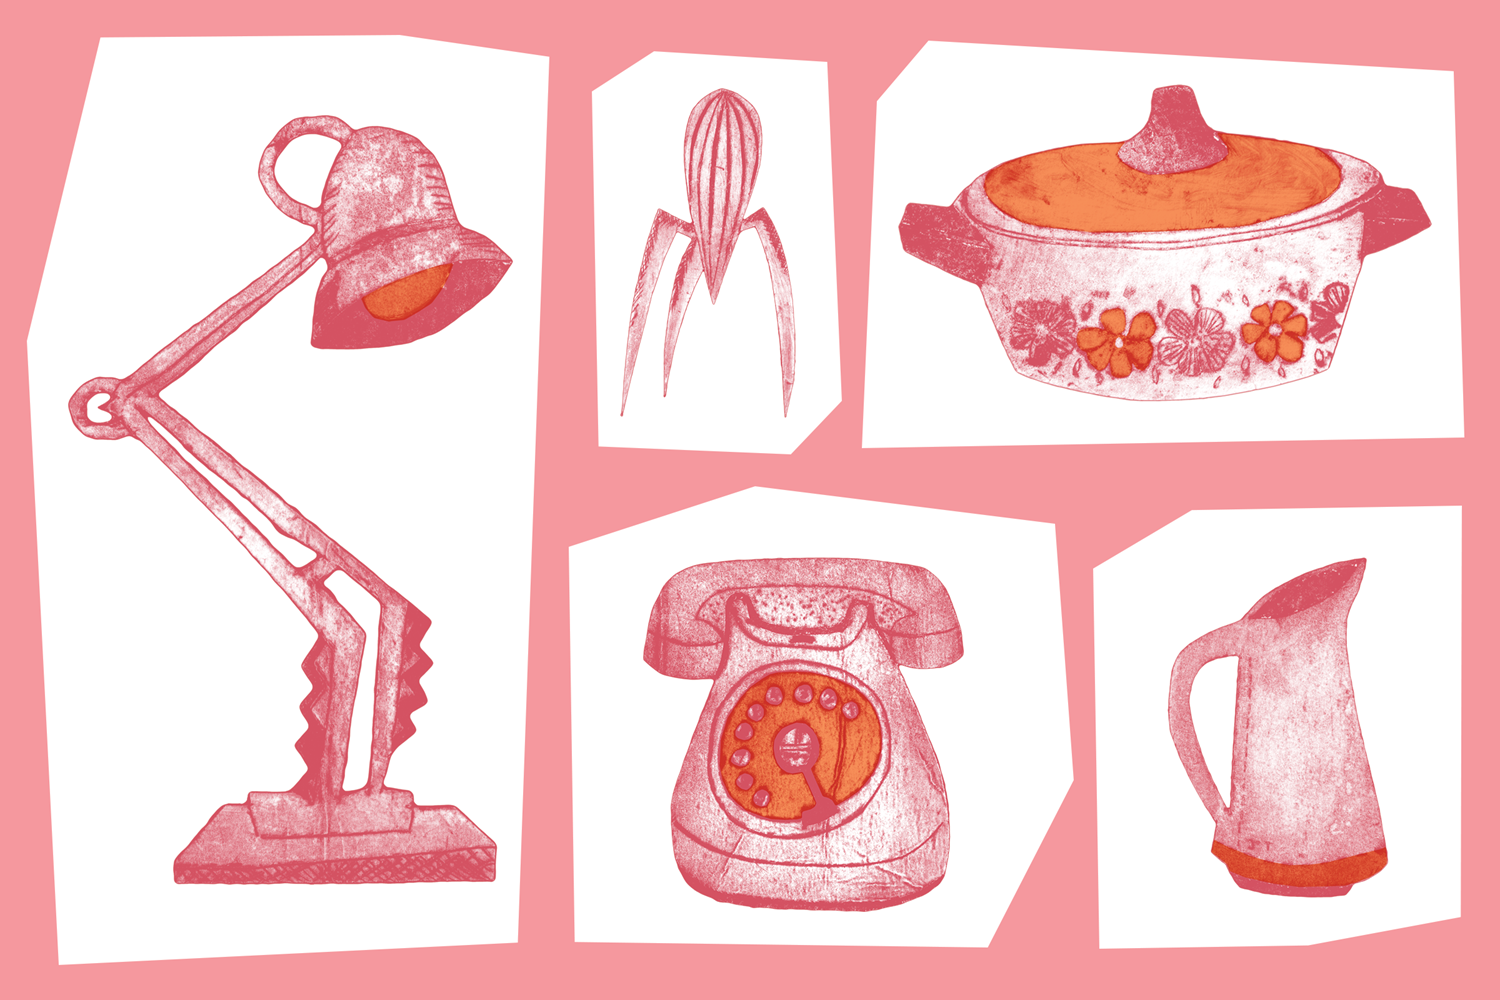 An illustration with a pink background, warm orange features, and white angular shapes. Within the shapes are illustrated objects including a lemon juicer, table lamp and vintage telephone